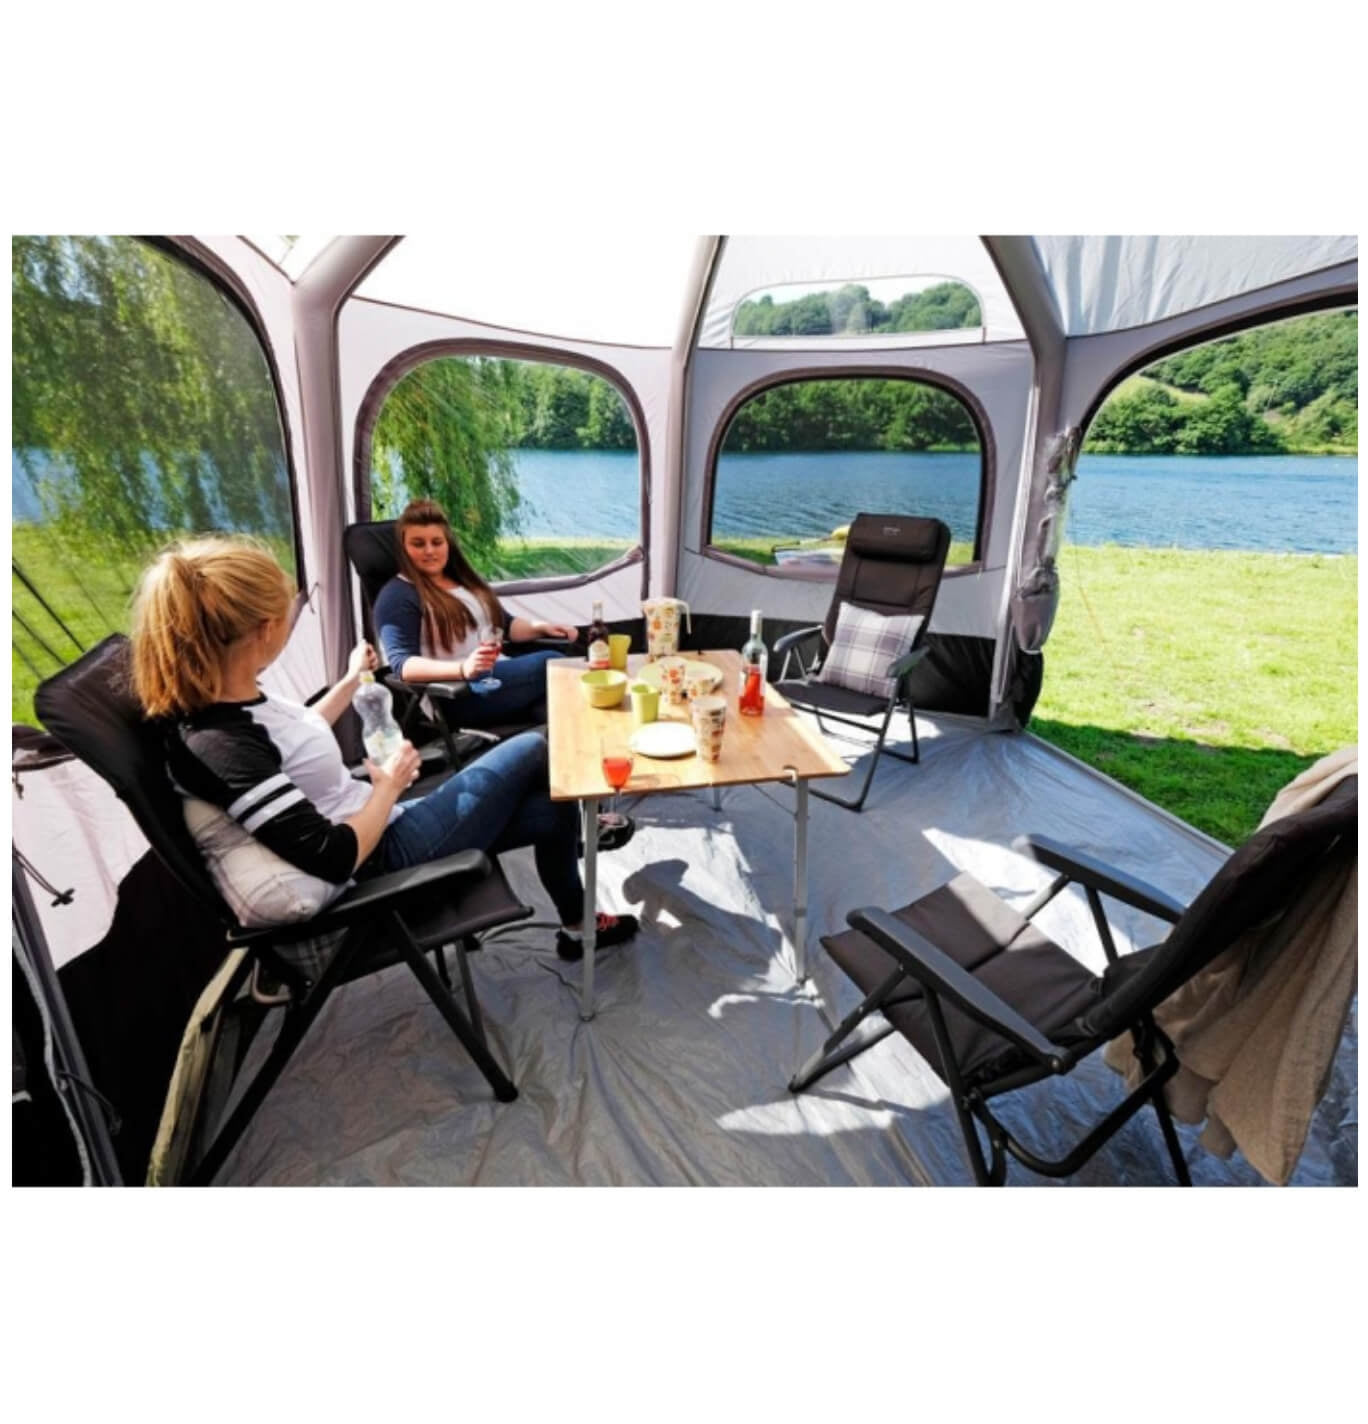 The Vango Hexaway interior being used by people for a picnic